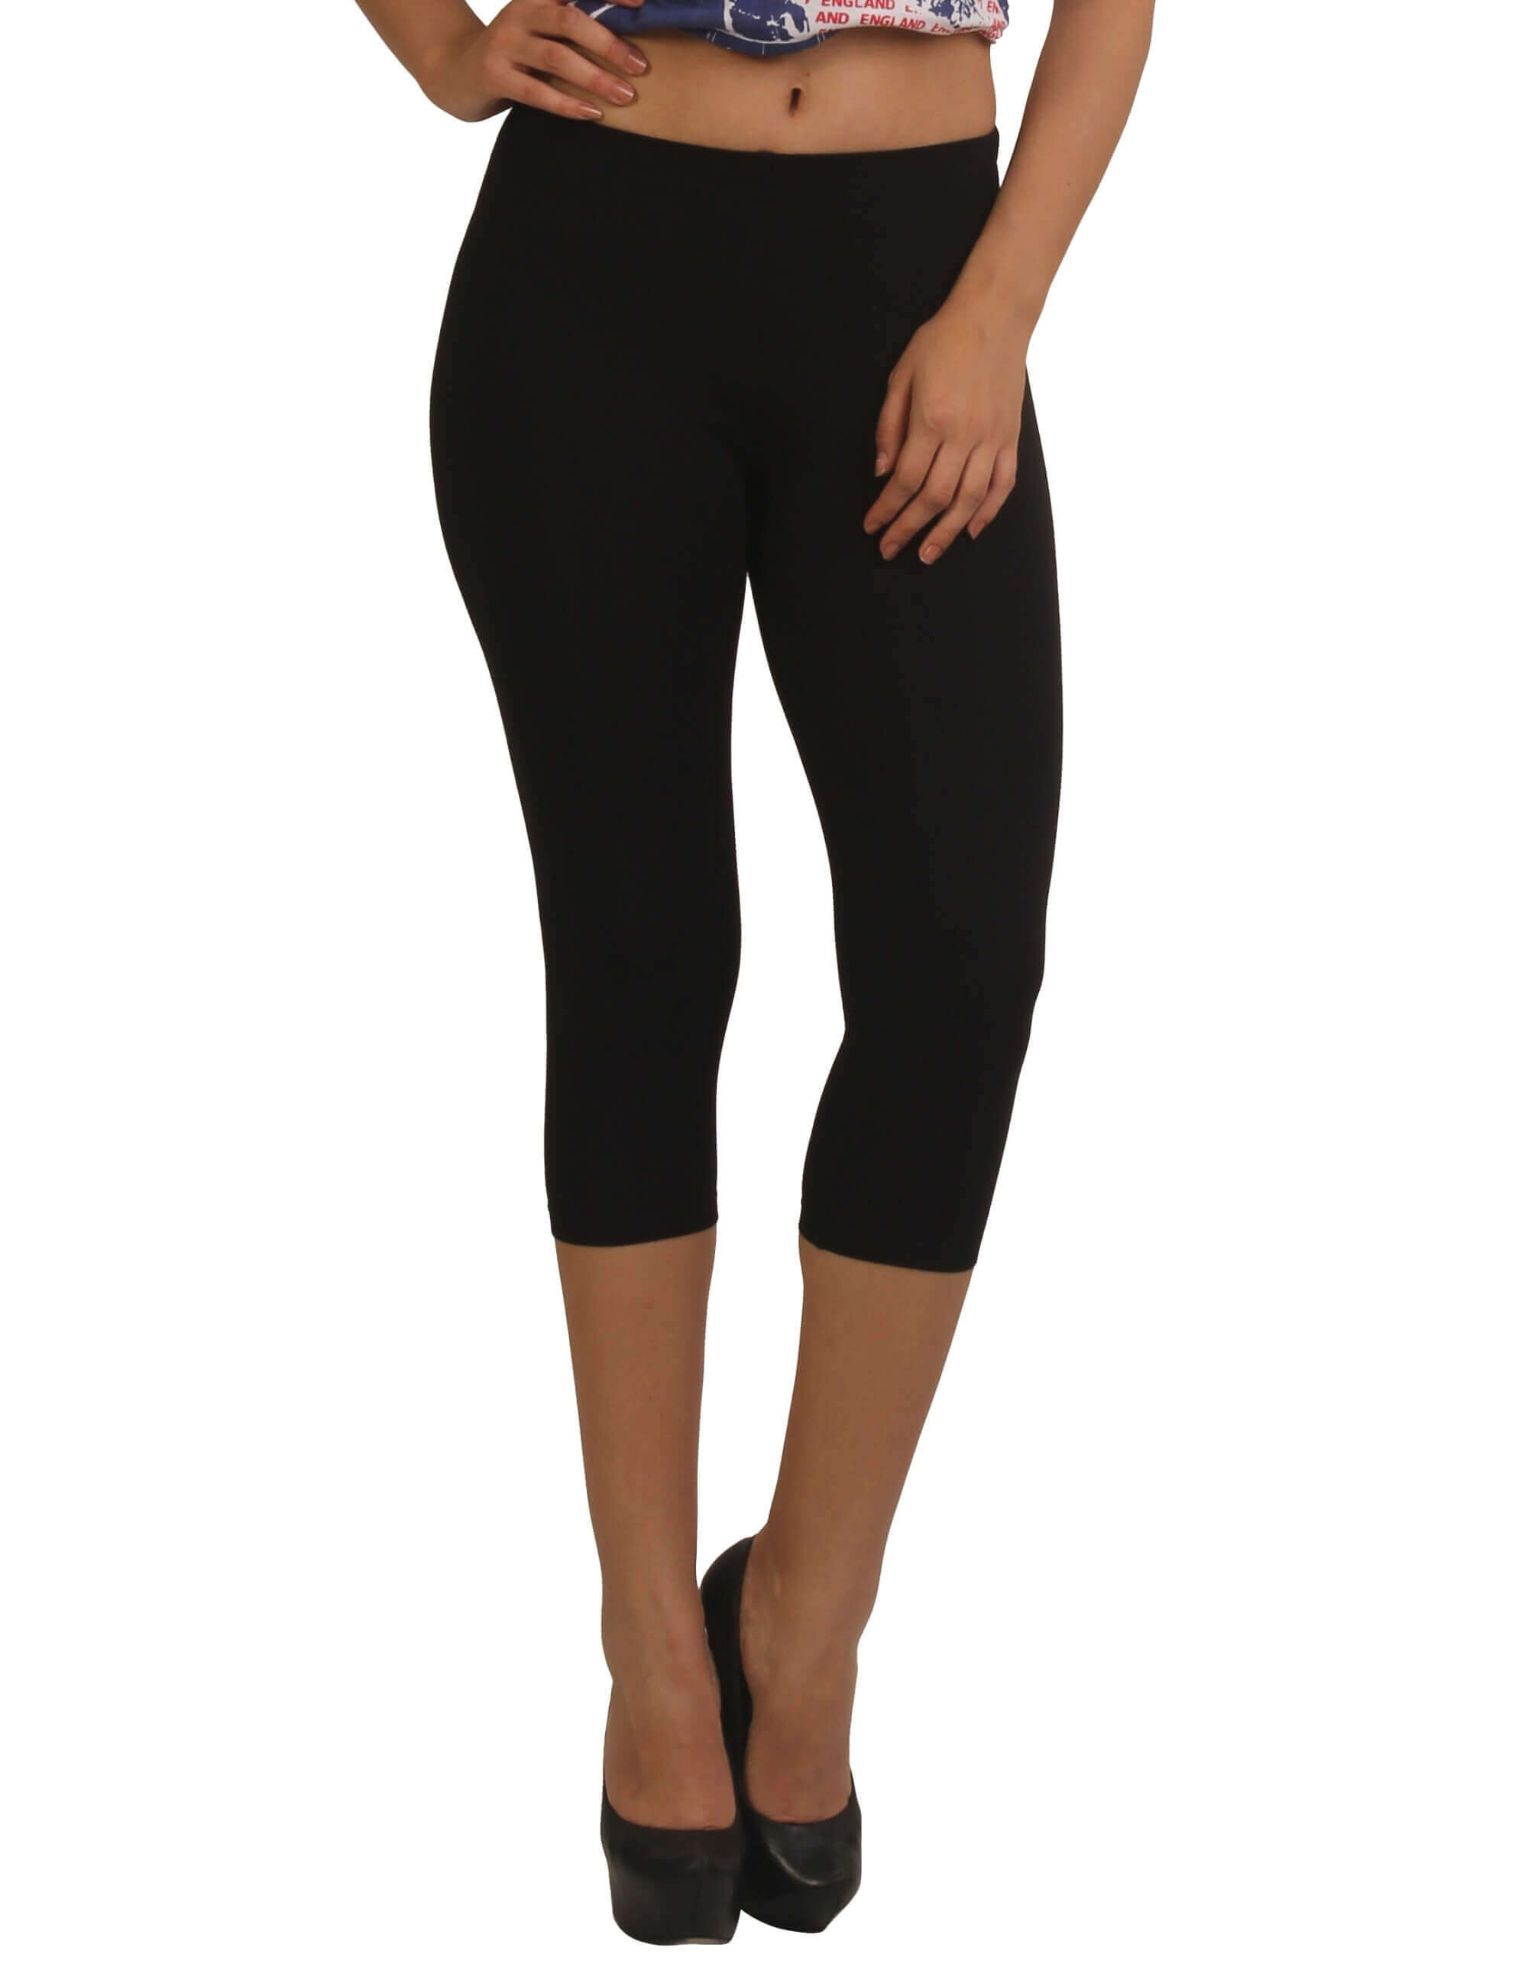 Buy PixieCapriLeggingsBiowashed Cotton Stretch Fit Capri Leggings Combo  Pack of 3 for WomenGirls Black Pink and Dark Brown  Free Size Online  at Best Prices in India  JioMart